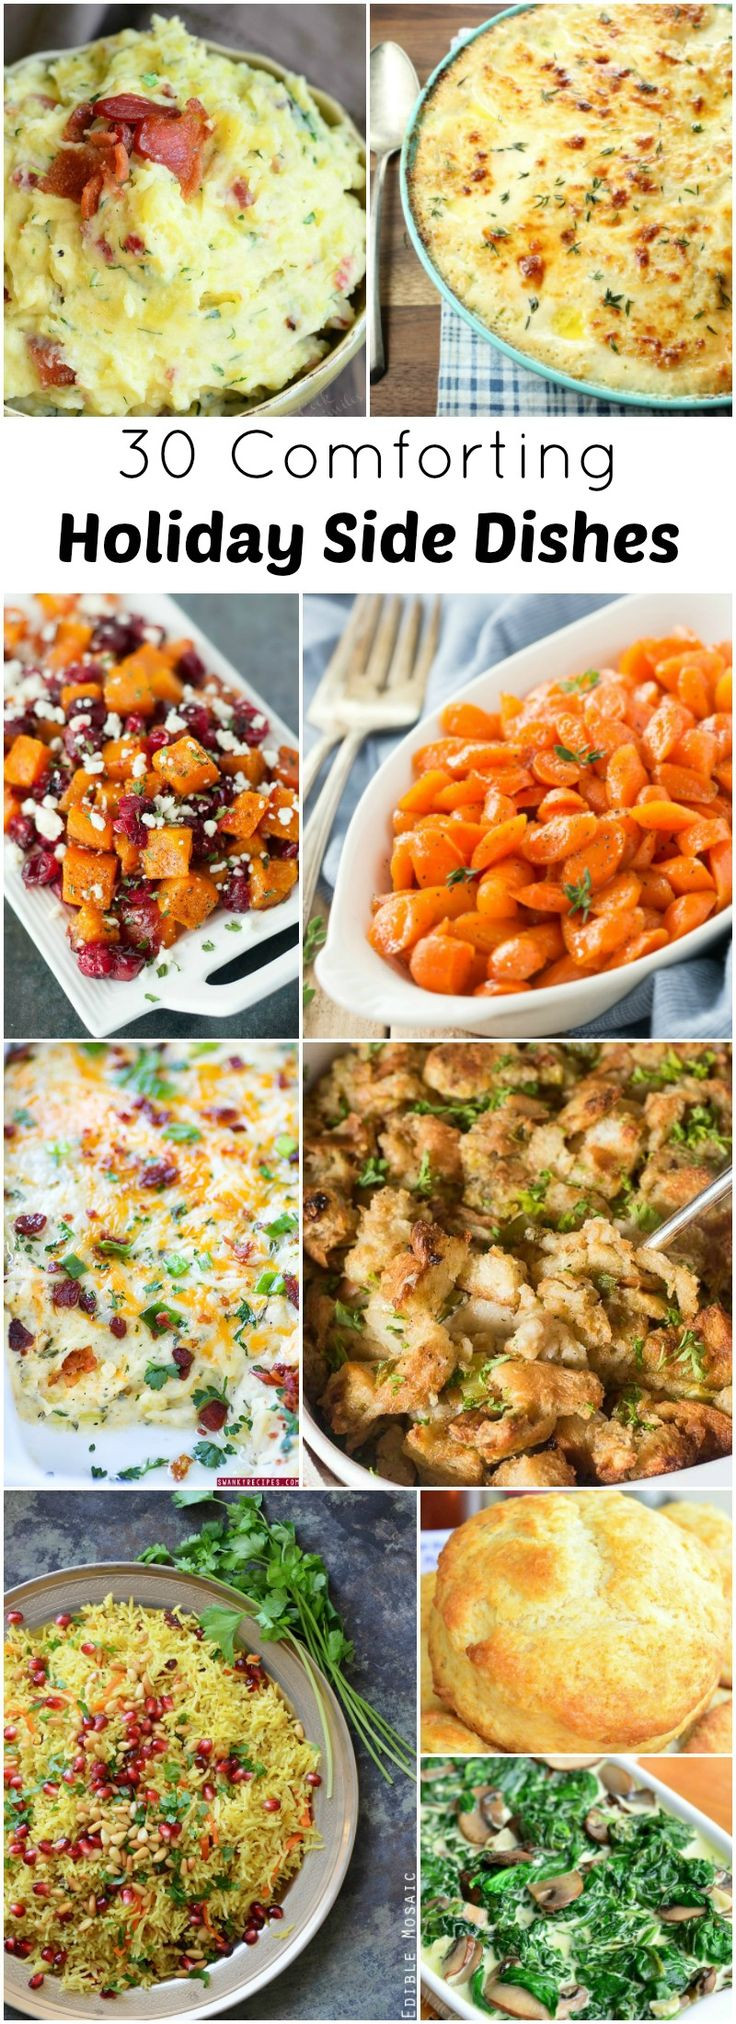 Christmas Dinner Side Dishes
 17 Best ideas about Holiday Side Dishes on Pinterest